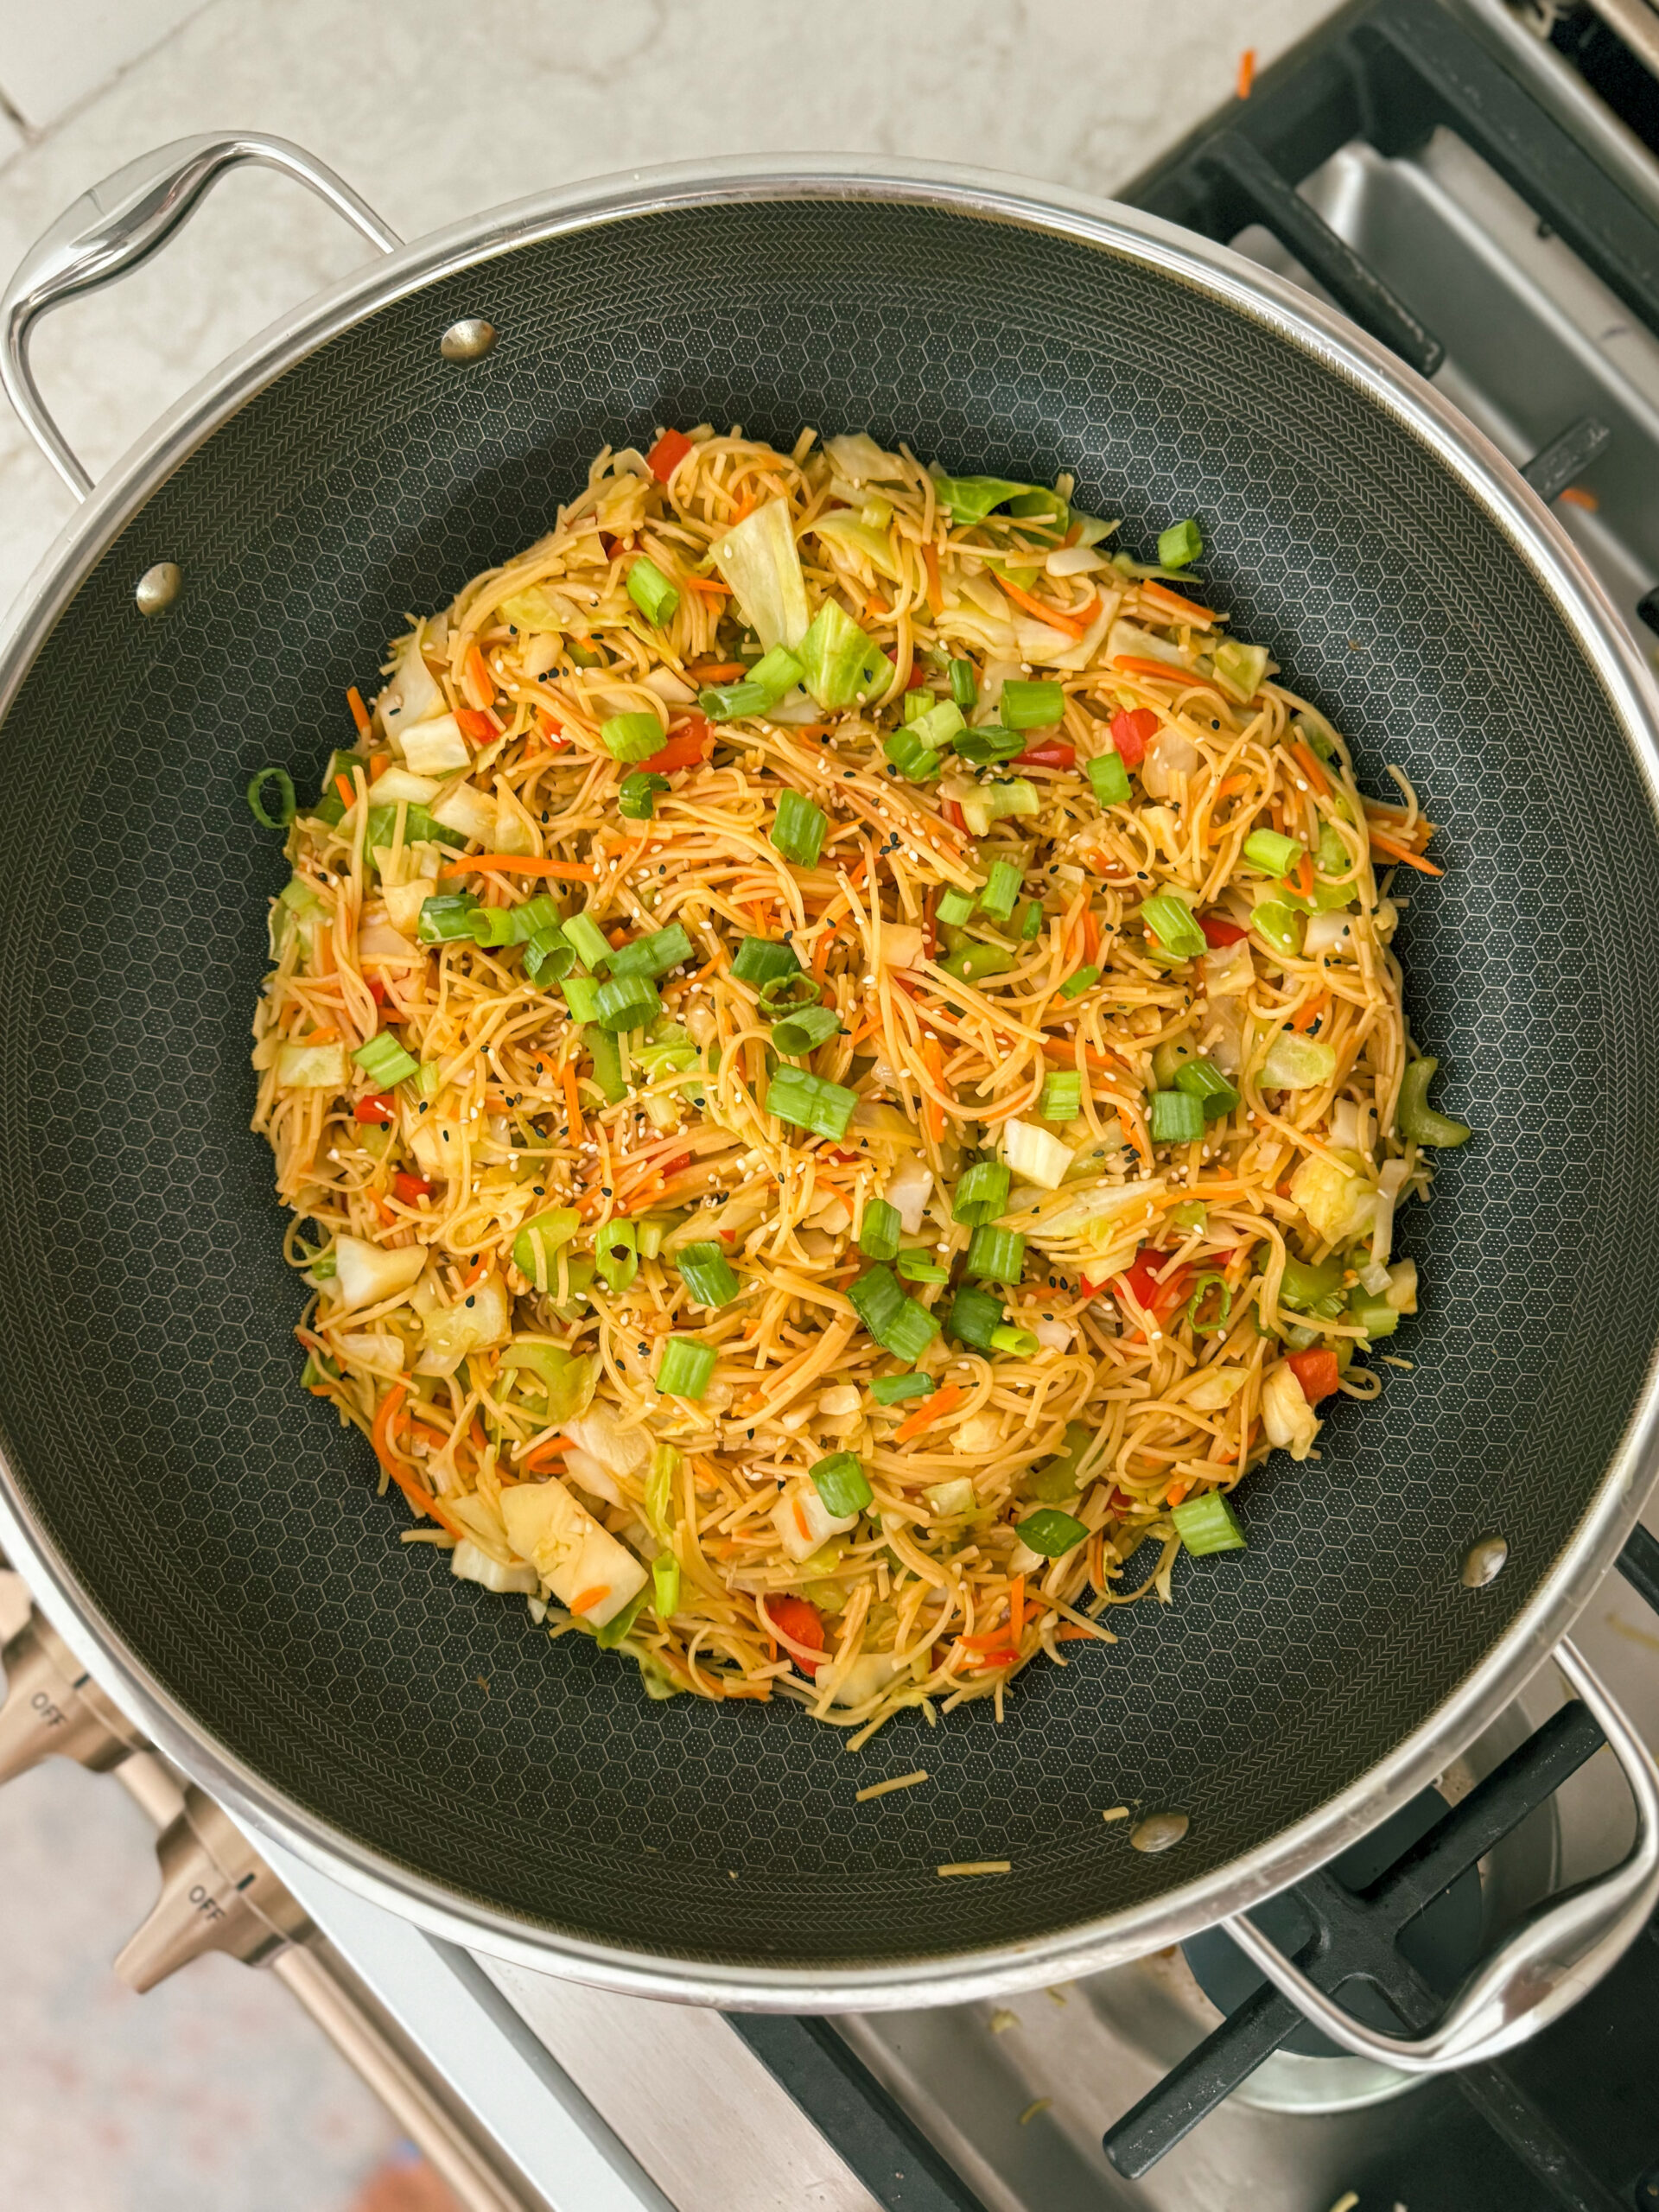 This Simple Veggie Chow Mein in a Wok makes an easy week night meal when you top it with your favorite protein like a fried egg or shrimp! This is an easy dinner recipe and perfect for making Chinese takeout at home! Get the full recipe on kirstenturk.com